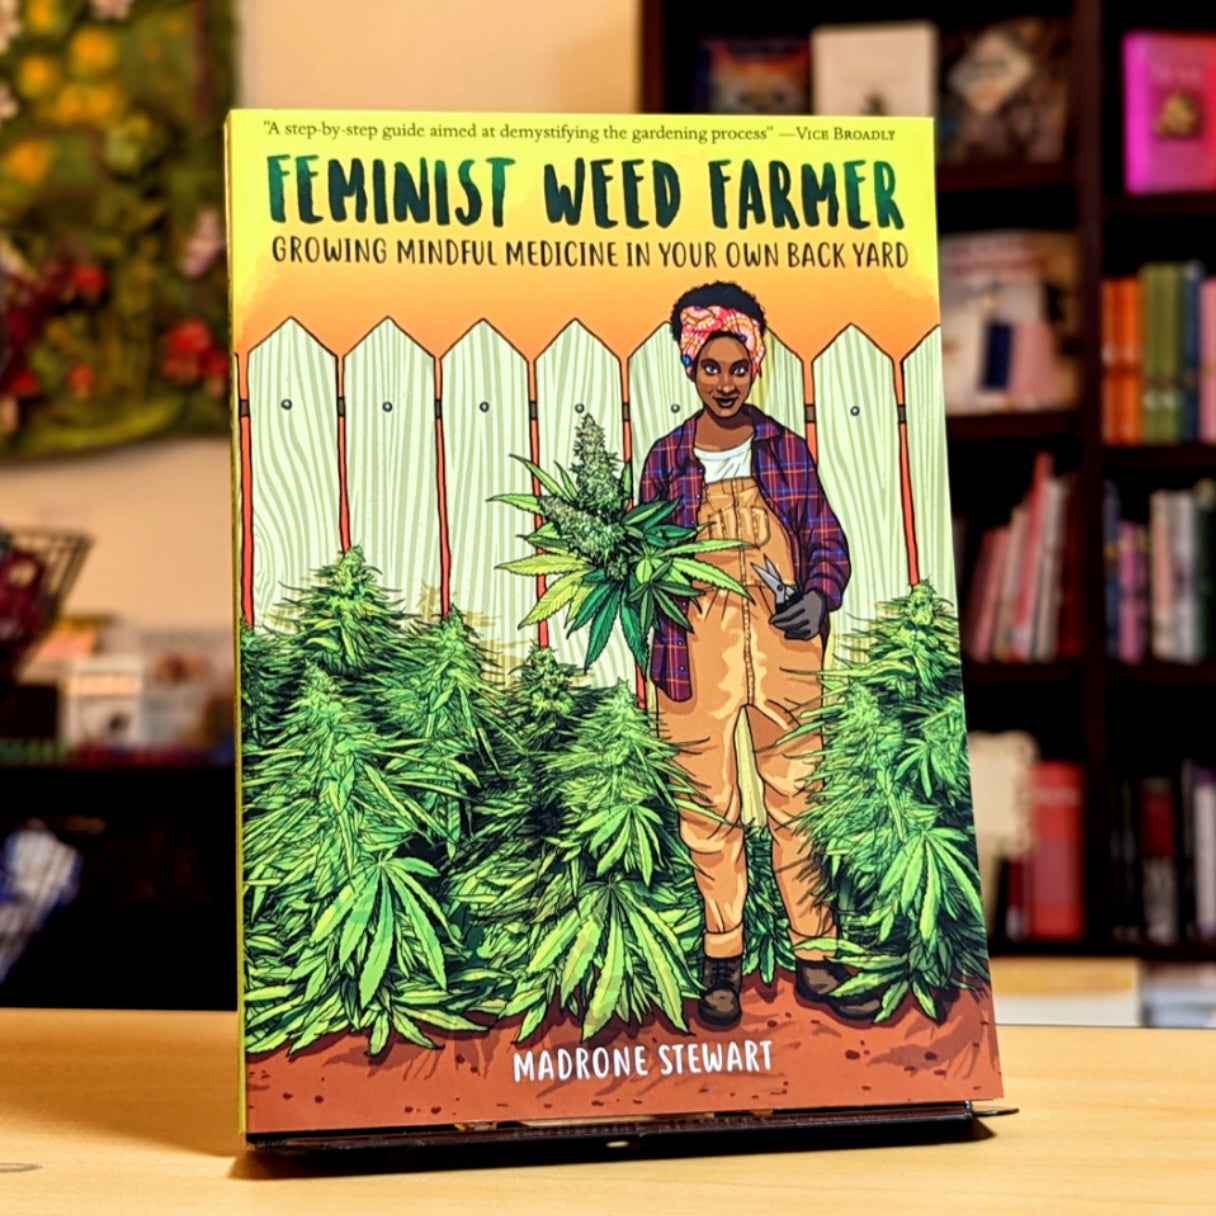 Feminist Weed Farmer: Growing Mindful Medicine in Your Own Backyard